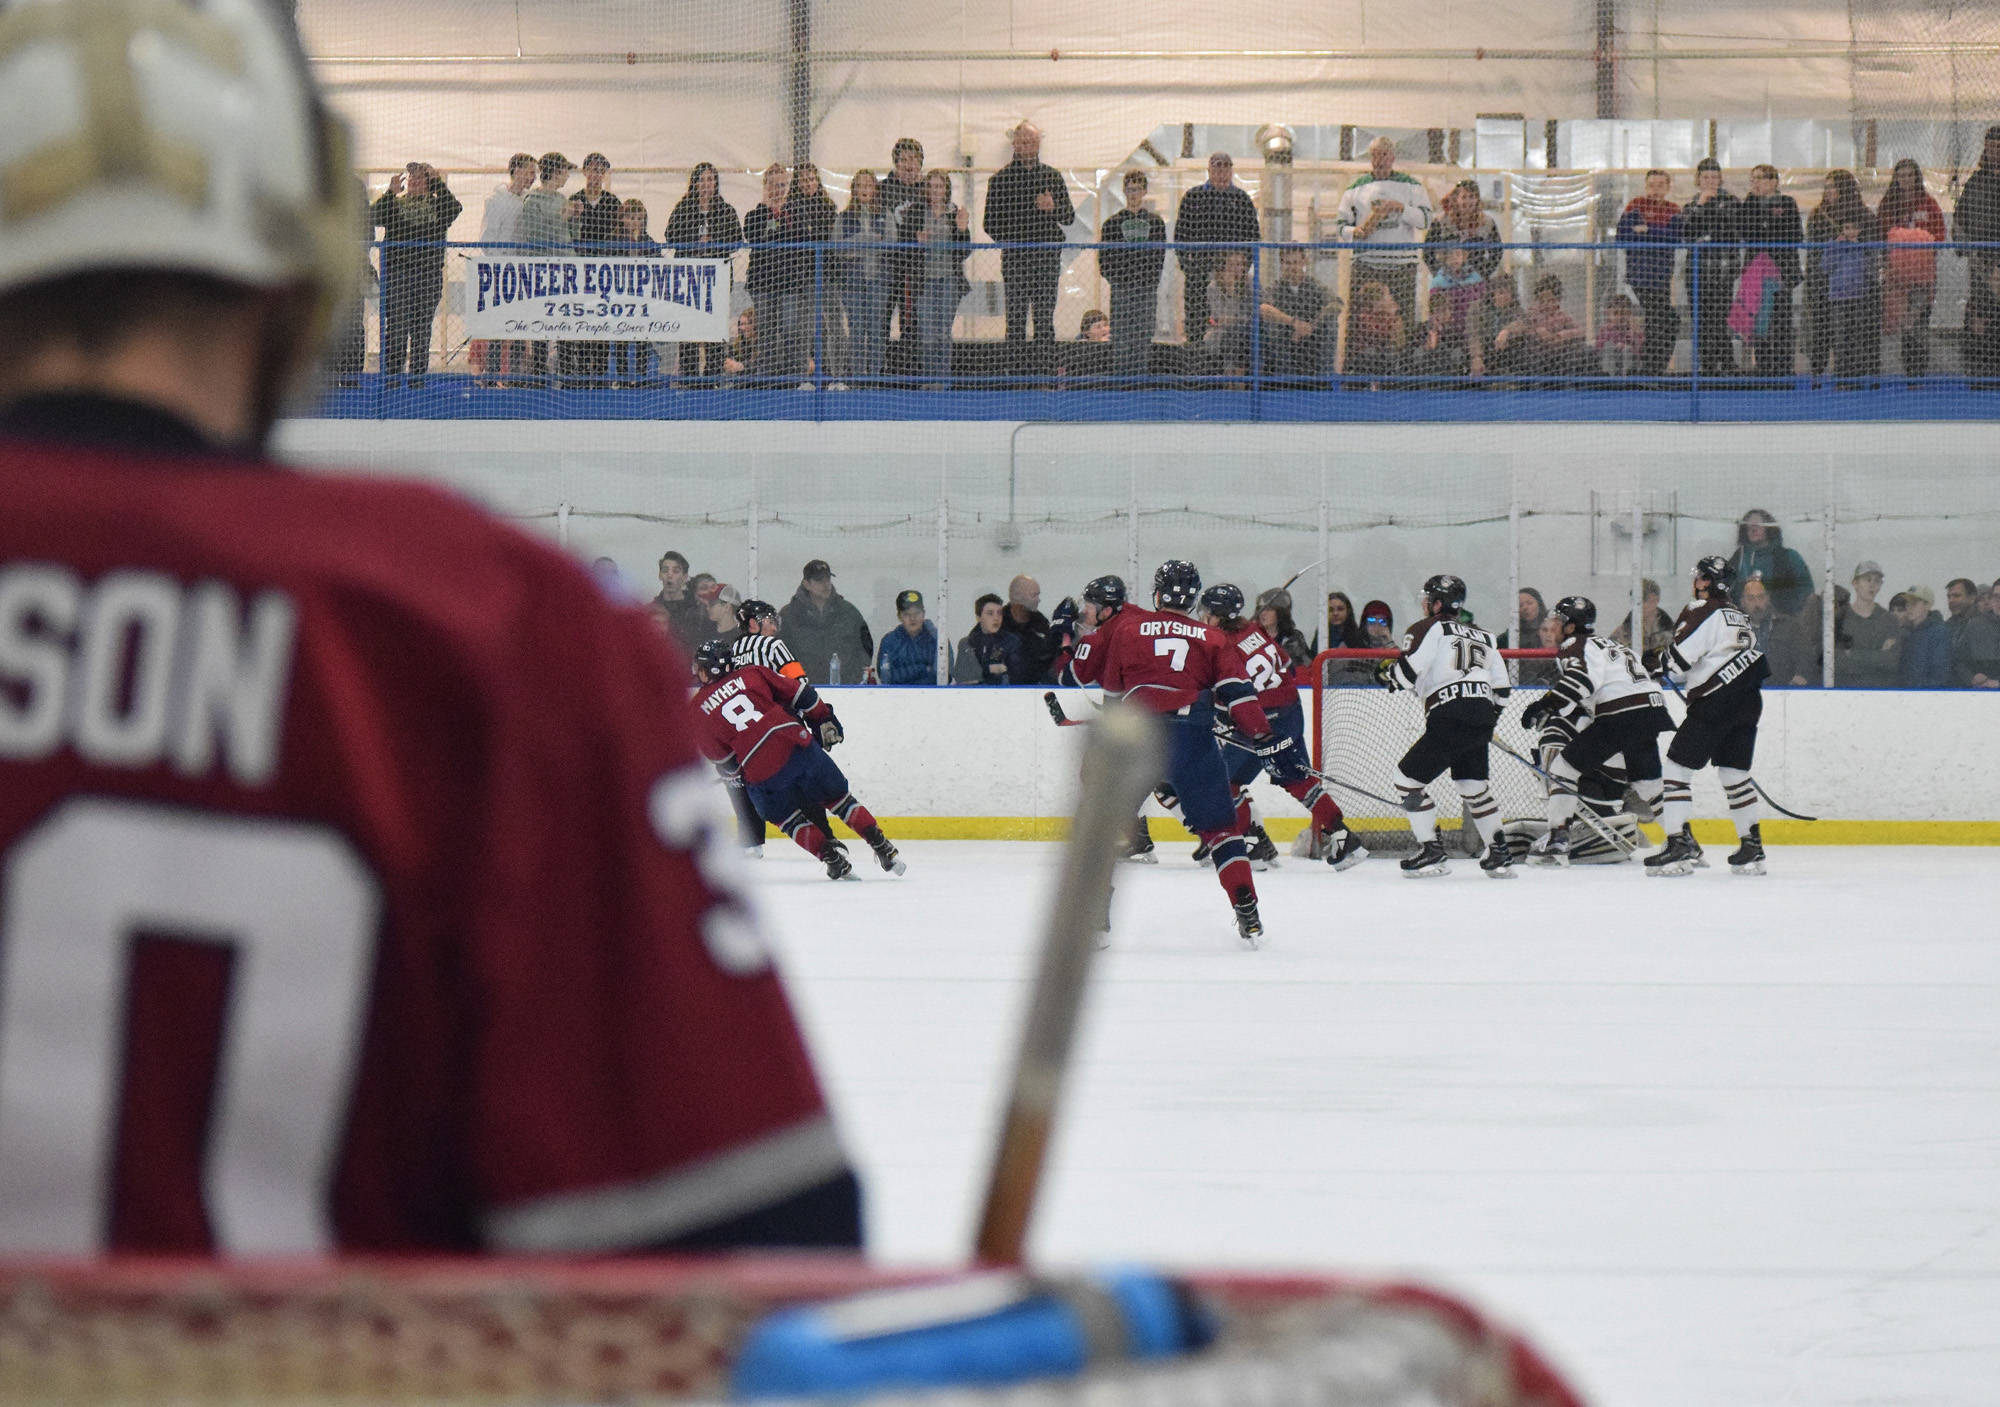 A capacity crowd watches the action in a North American Hockey League contest between the Kenai River Brown Bears and Fairbanks Ice Dogs, Friday night at the MTA Events Center in Palmer. (Photo by Joey Klecka/Peninsula Clarion)